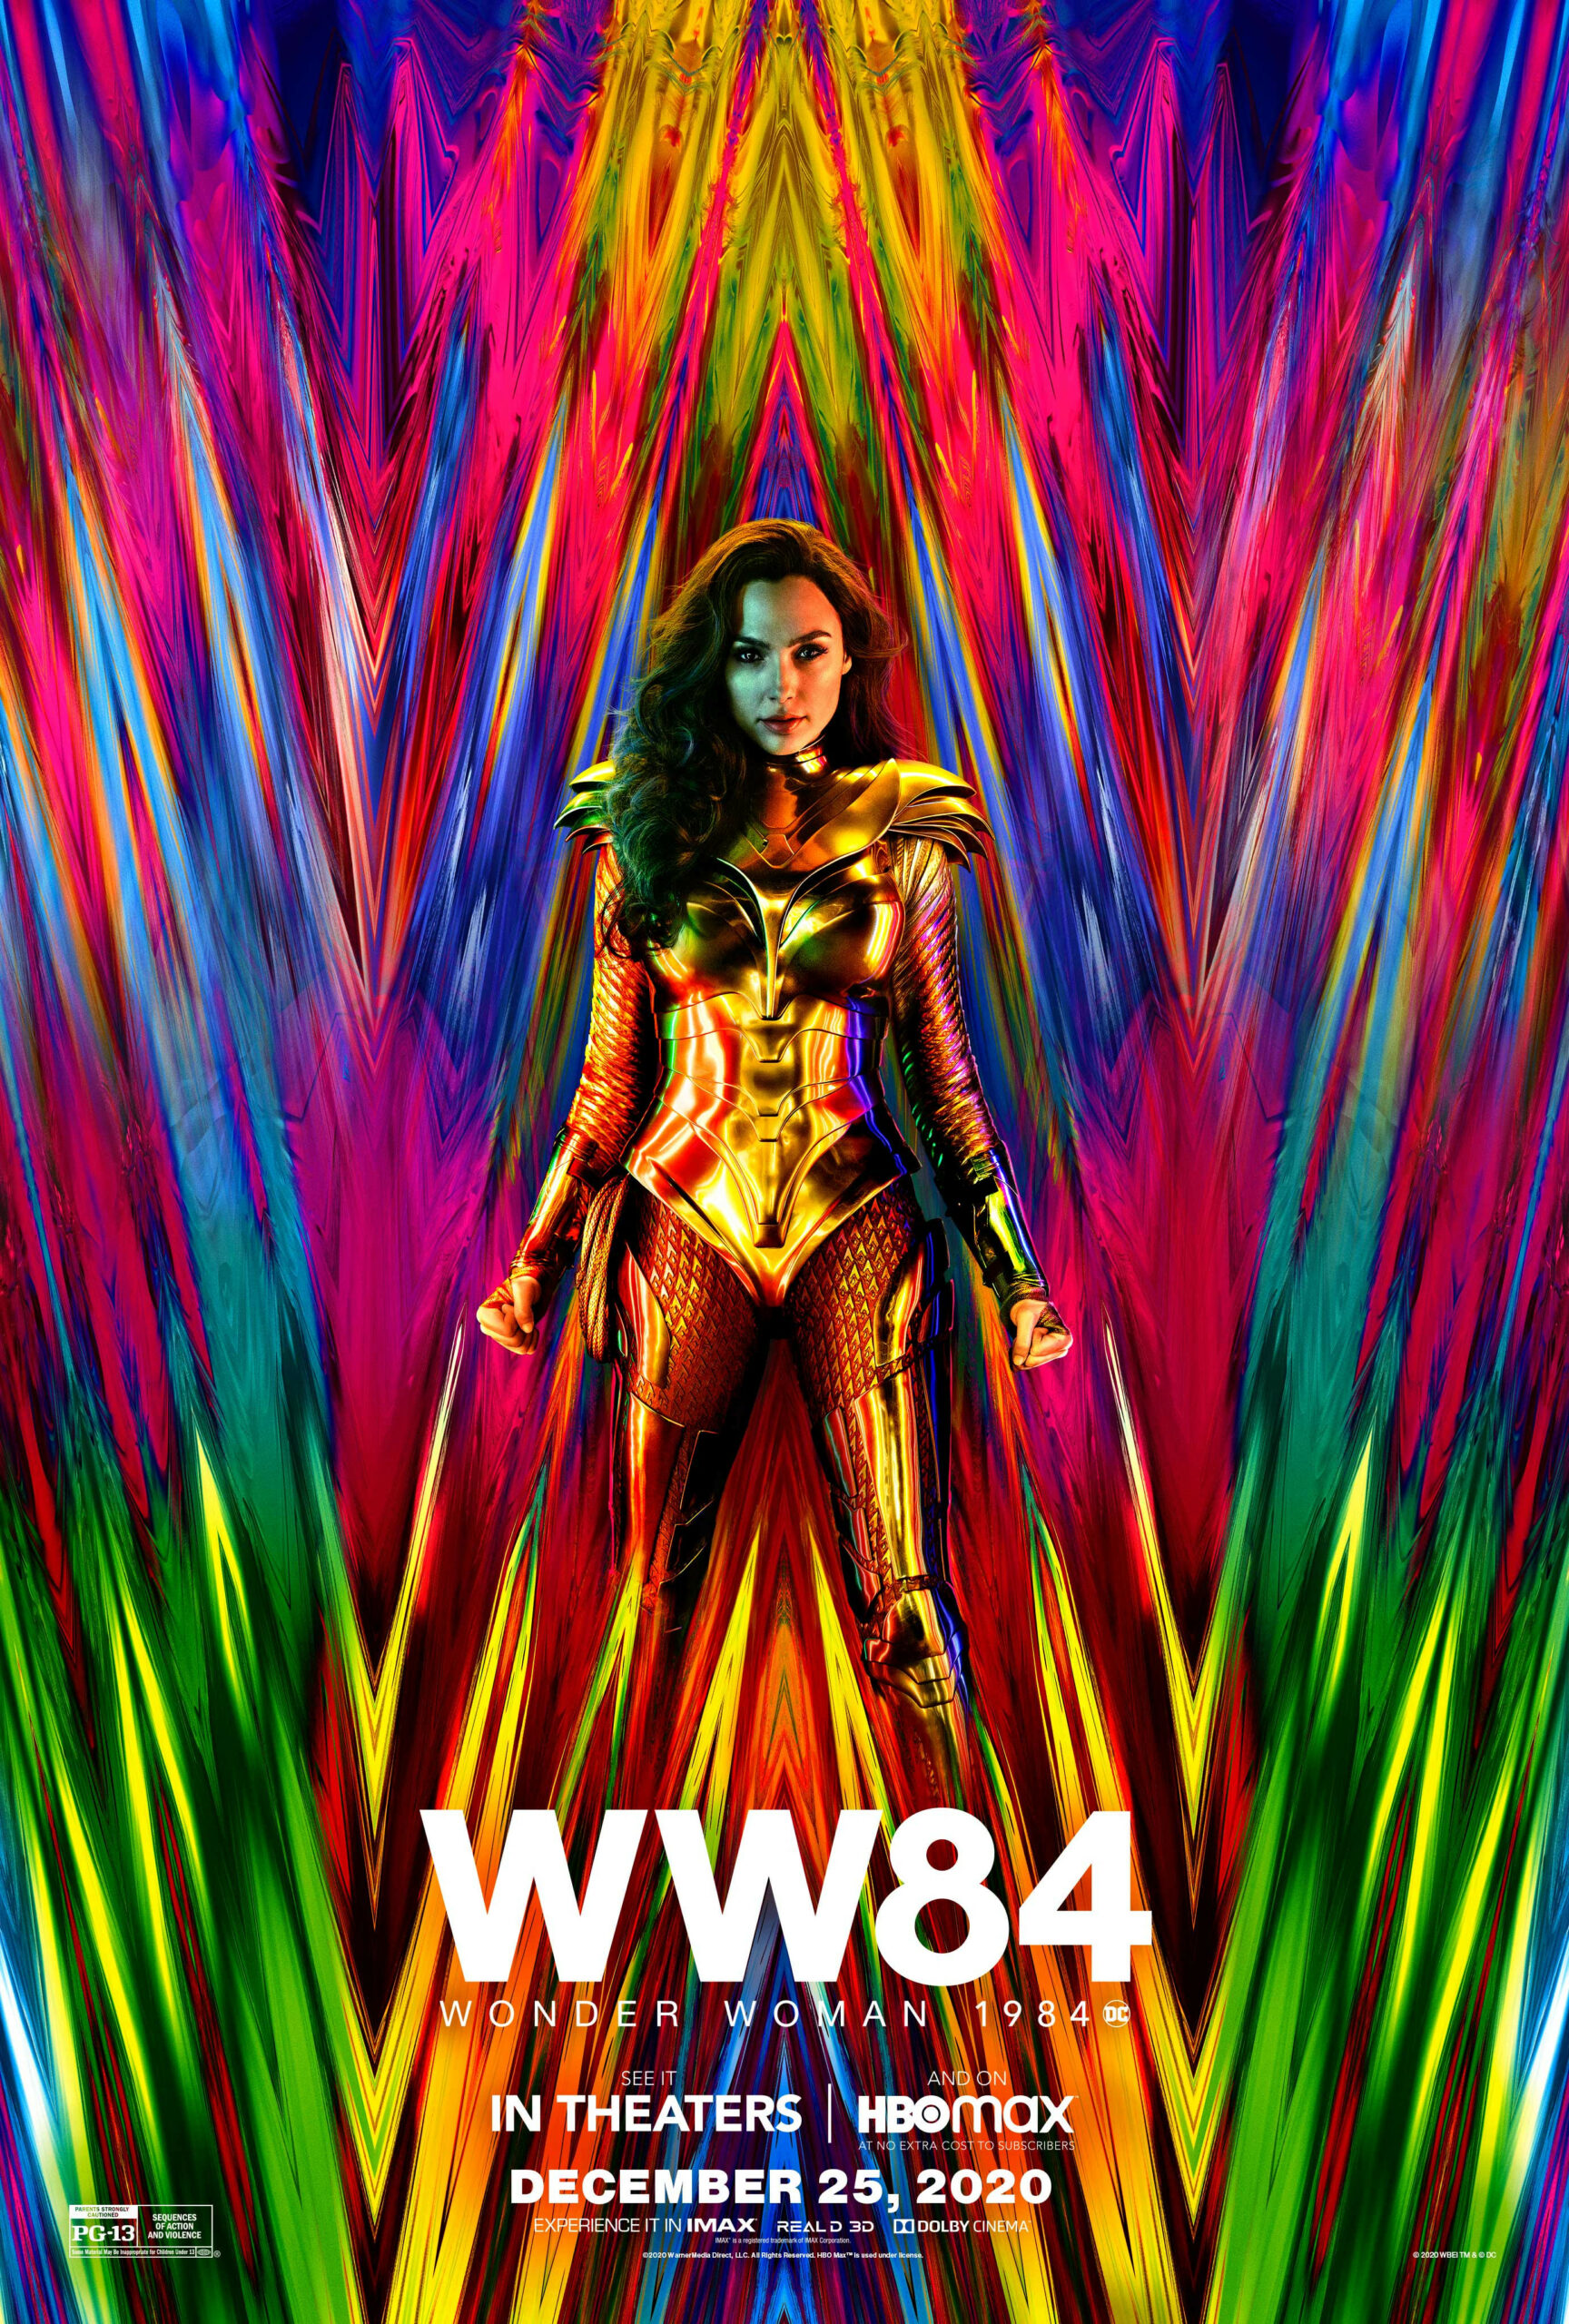 Wonder Woman 1984 is one of the best DC movies list